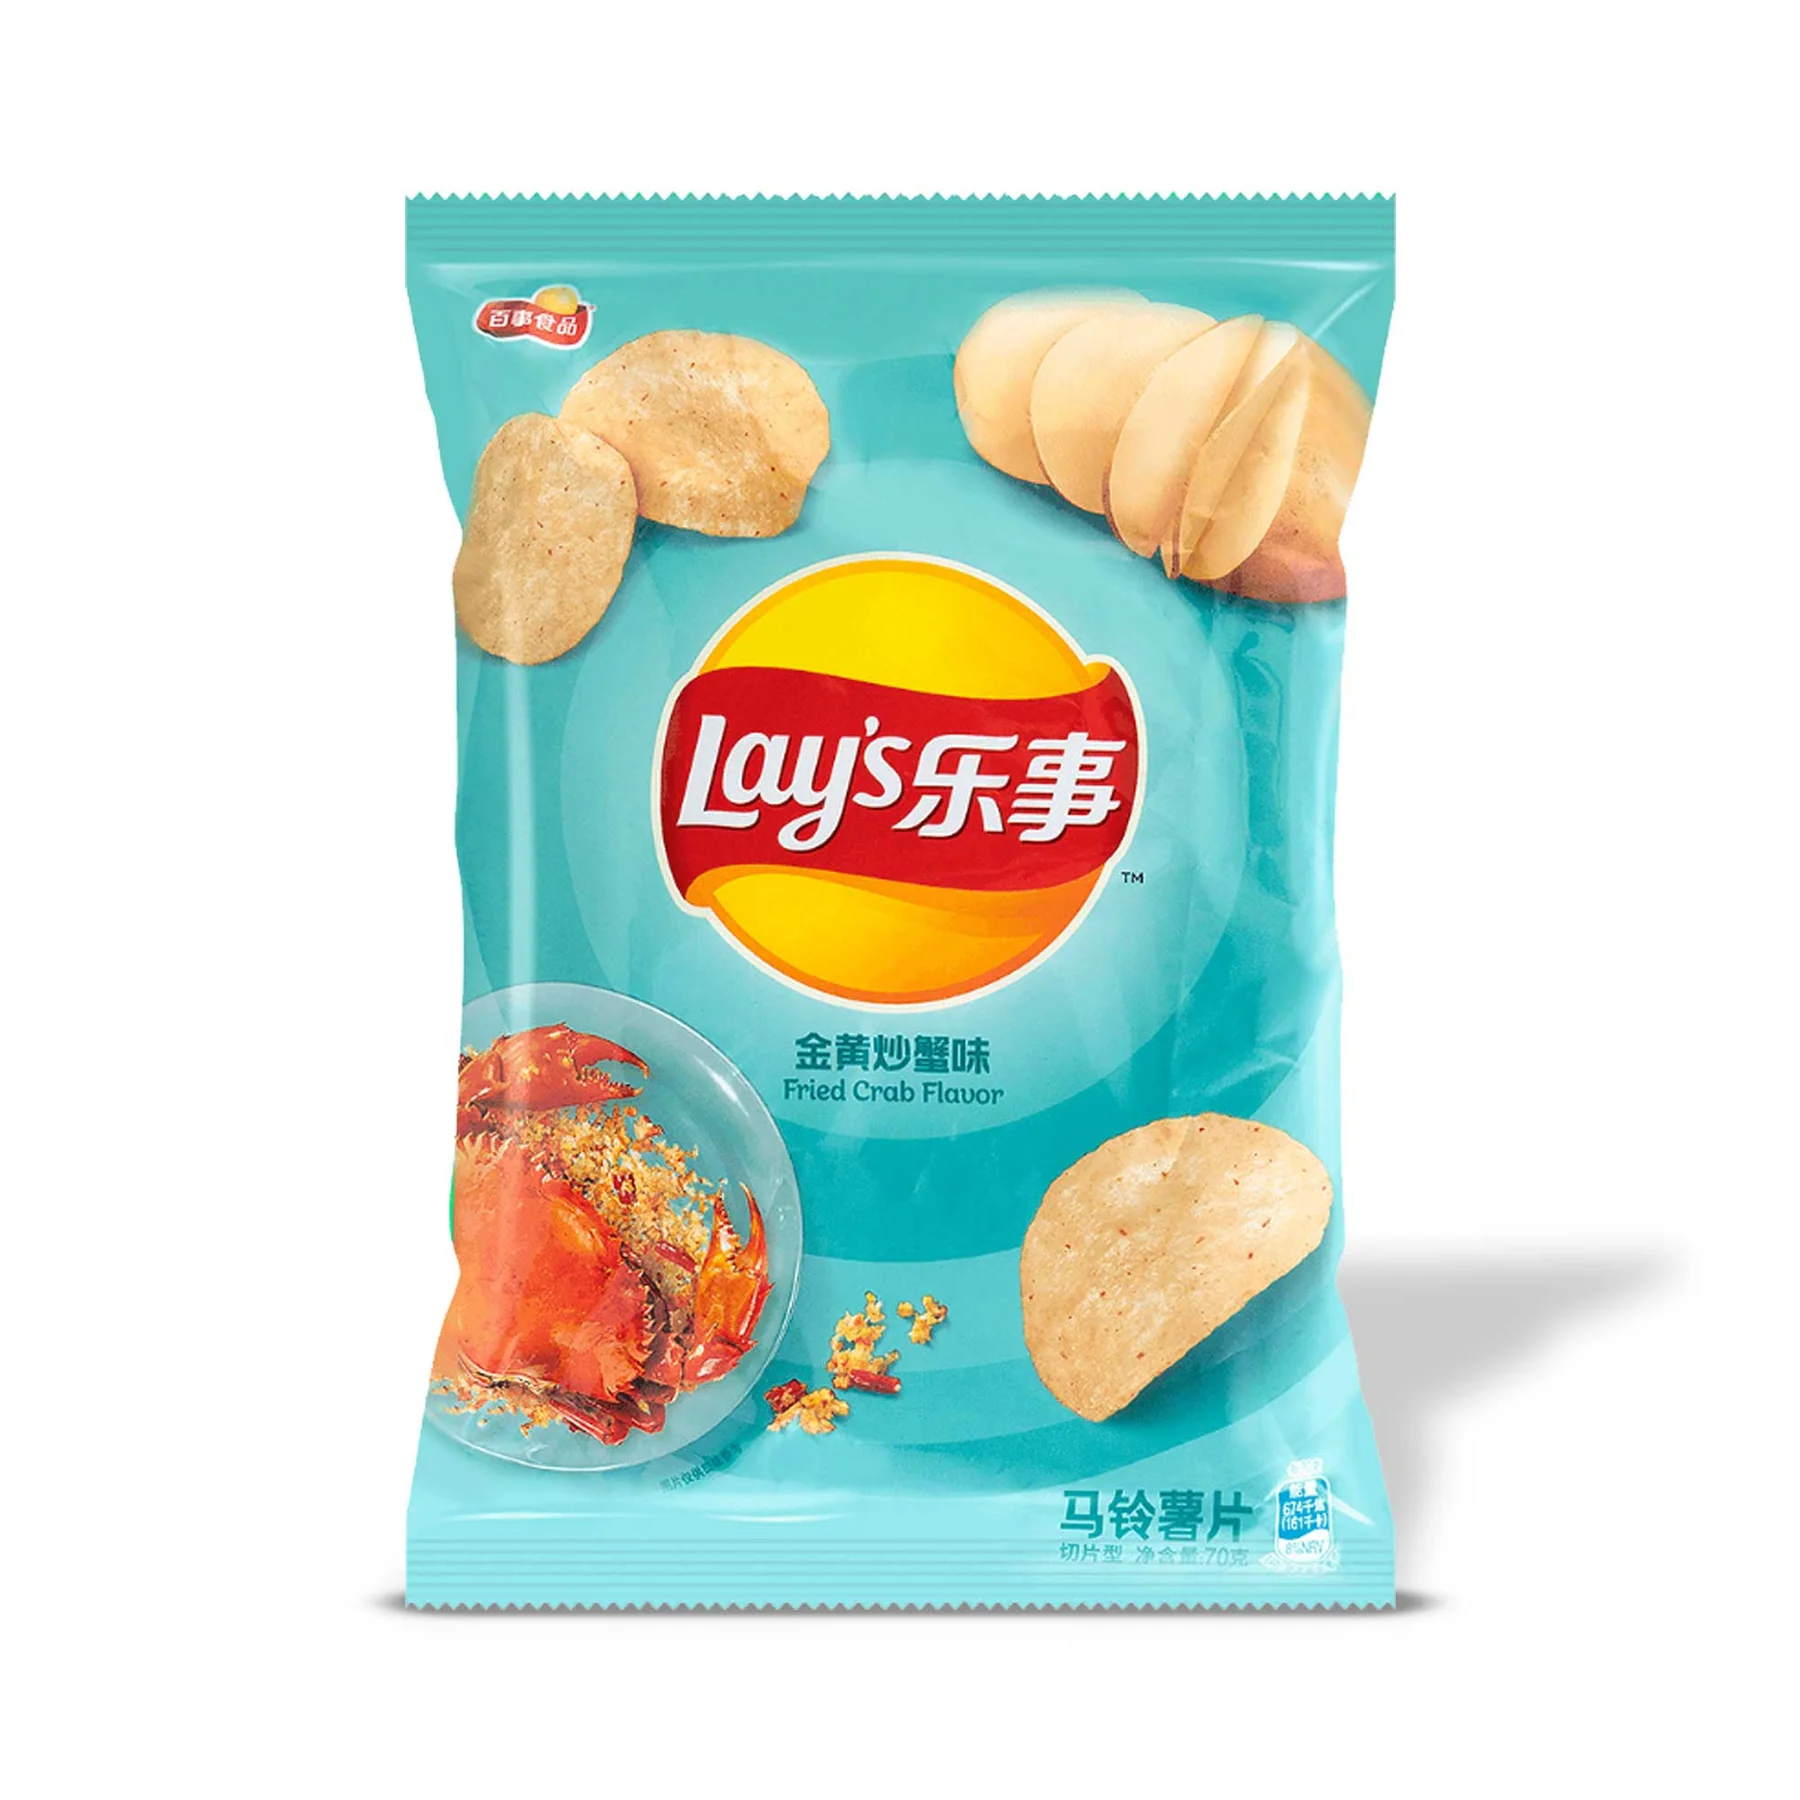 Lay's Golden Fried Crab 70g (China)